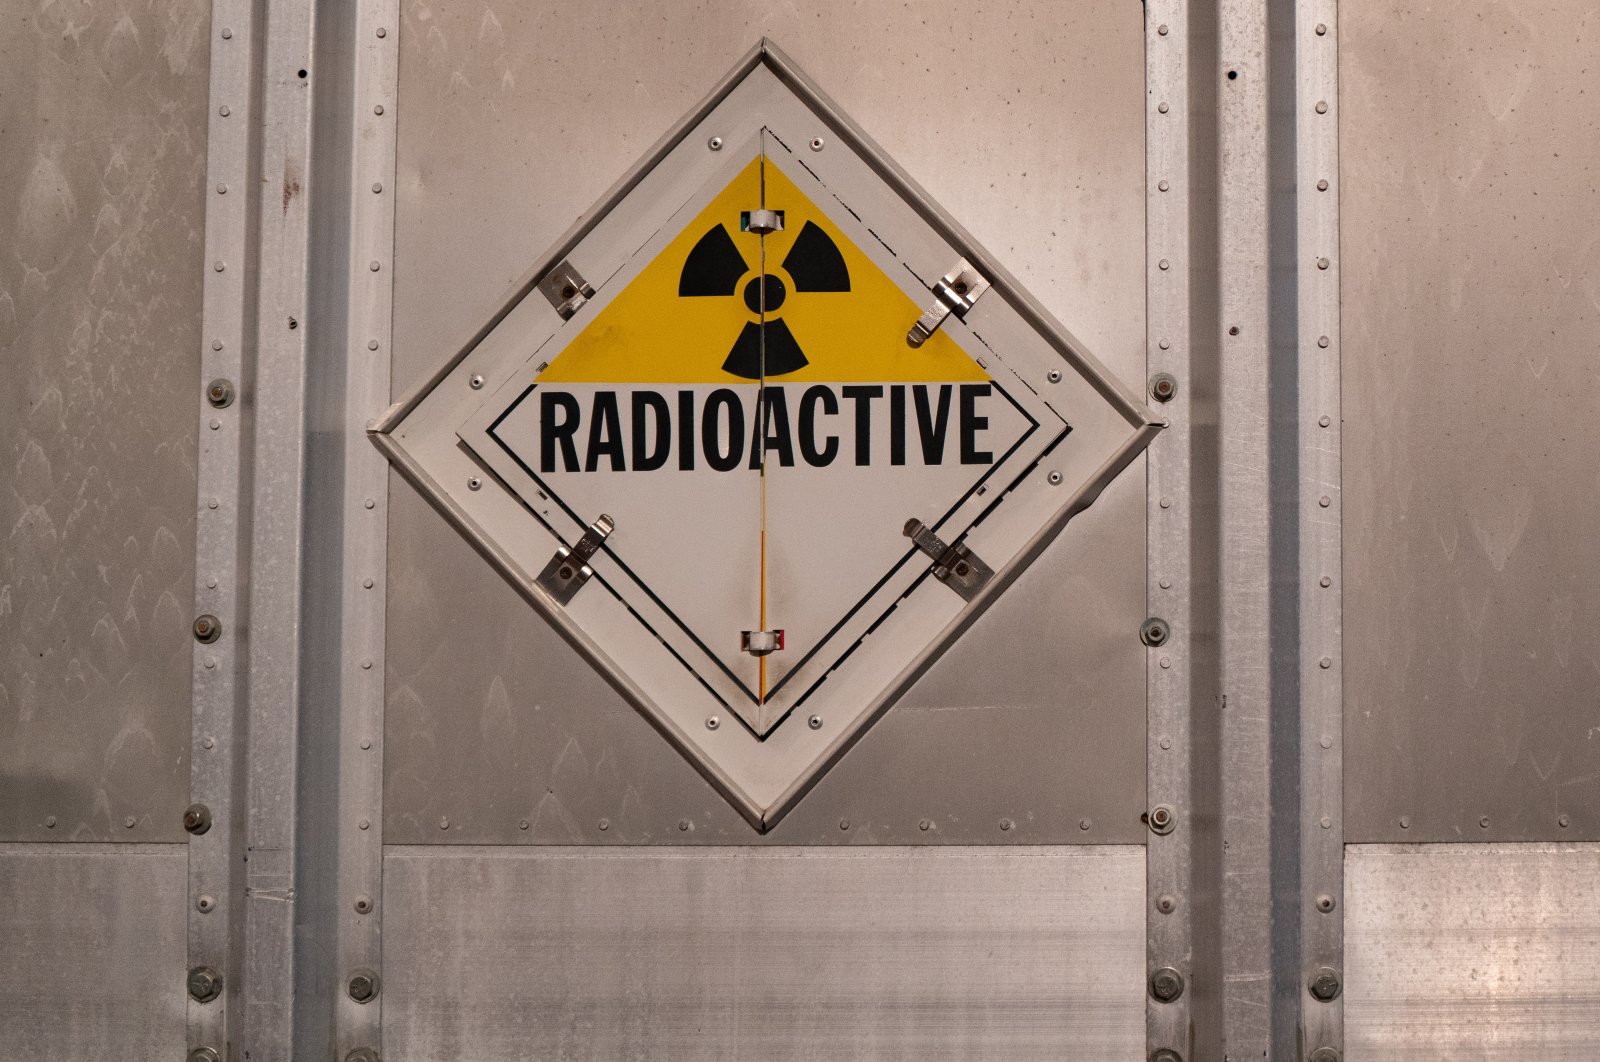 The defendant stands accused of conspiring to sell weapons-grade nuclear material sourced from Myanmar. (Getty Images)